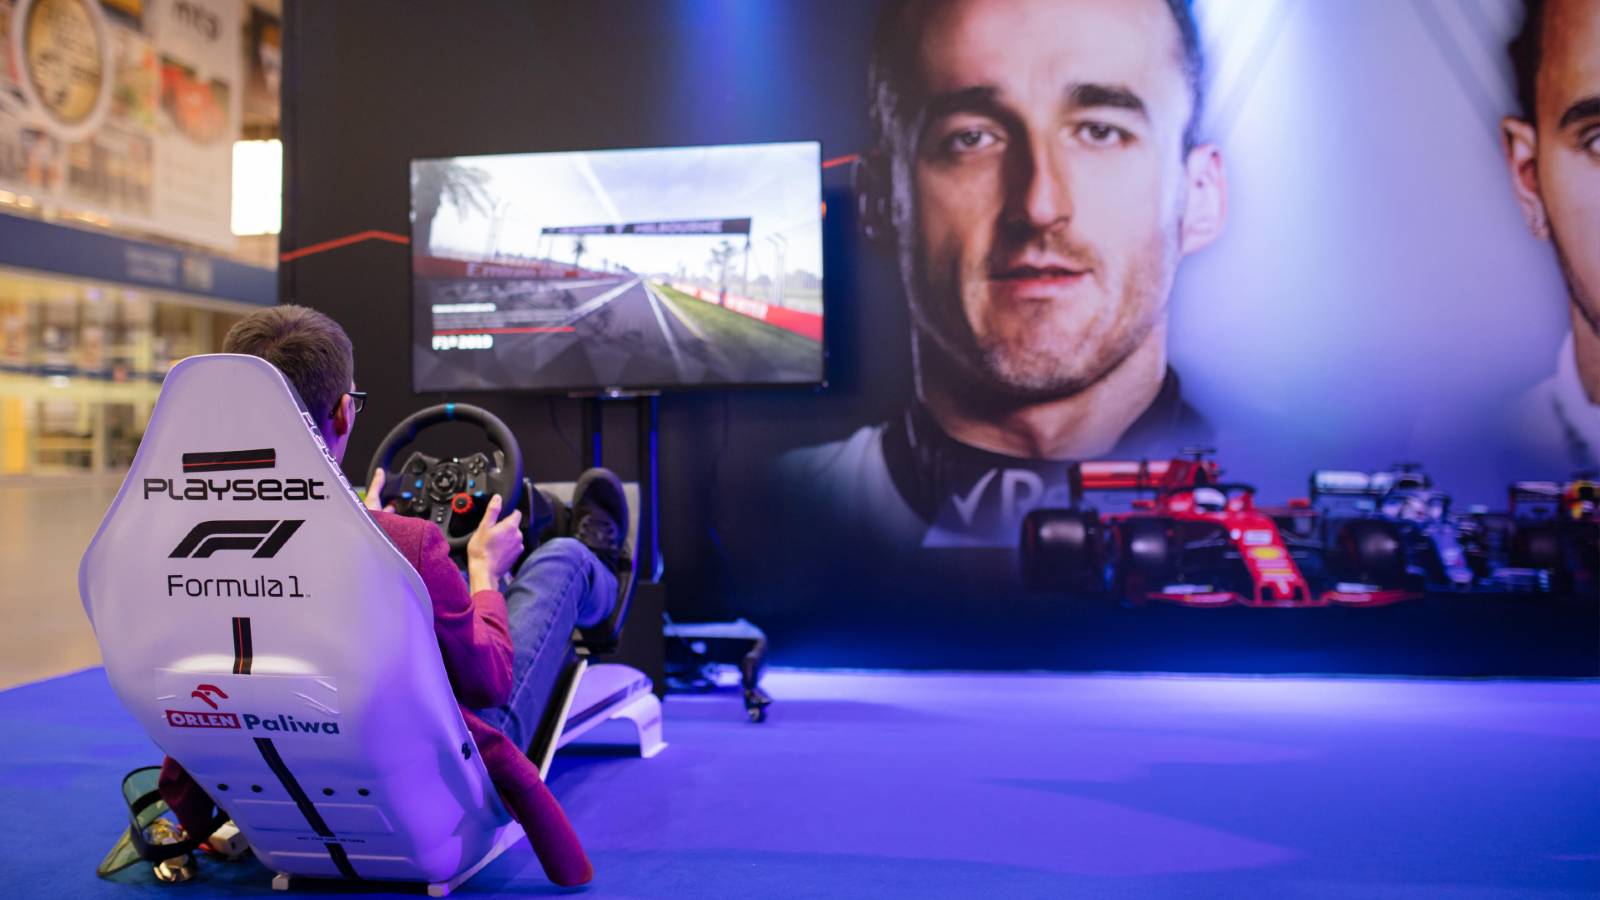 A player tries the F1 video game. Poznan October 2019.